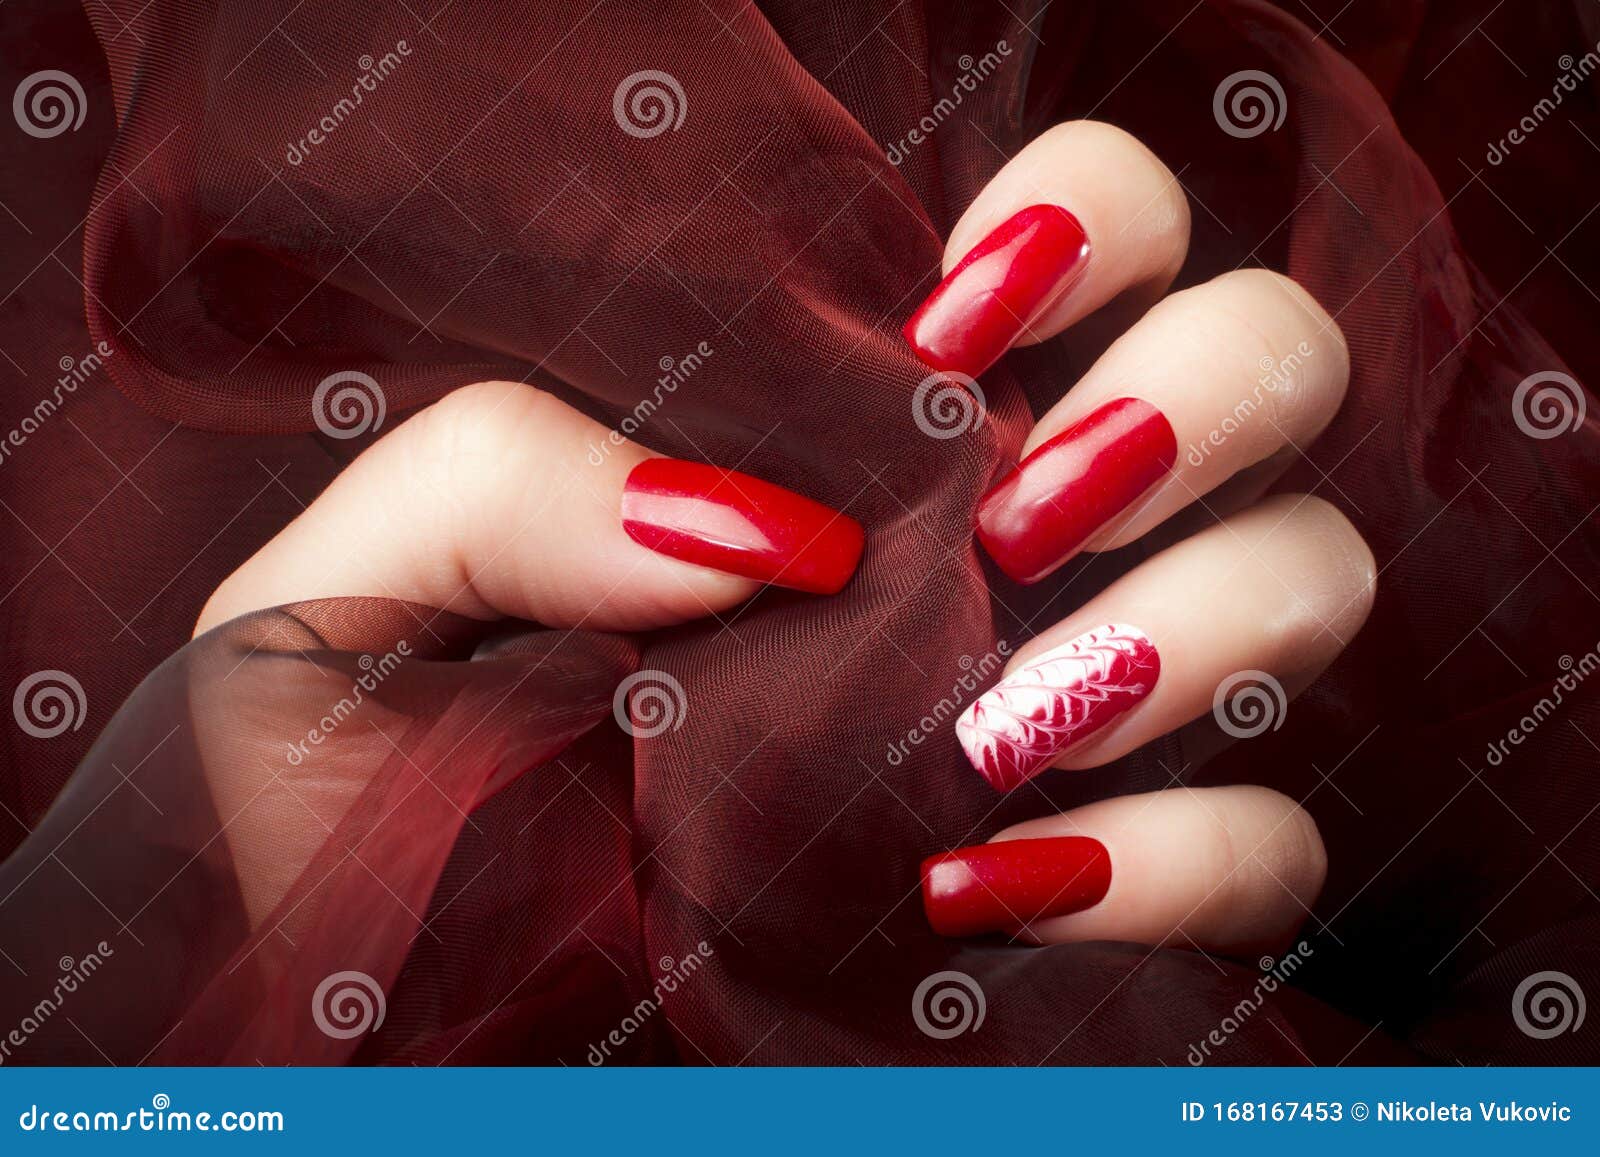 Beautiful Red Nails Manicure Stock Image - Image of long, concept ...